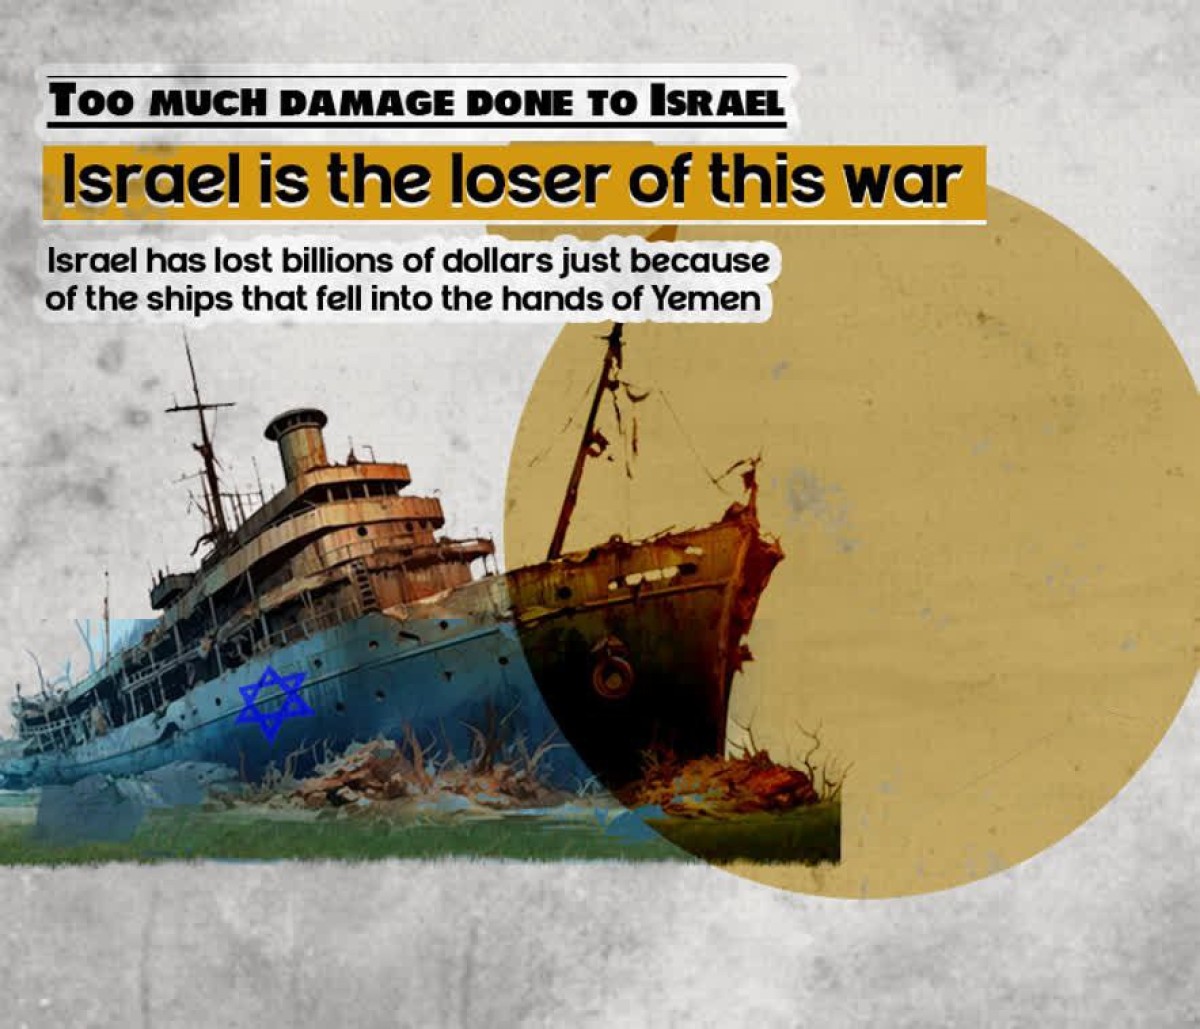 TOO MUCH DAMAGE DONE TO ISRAEL